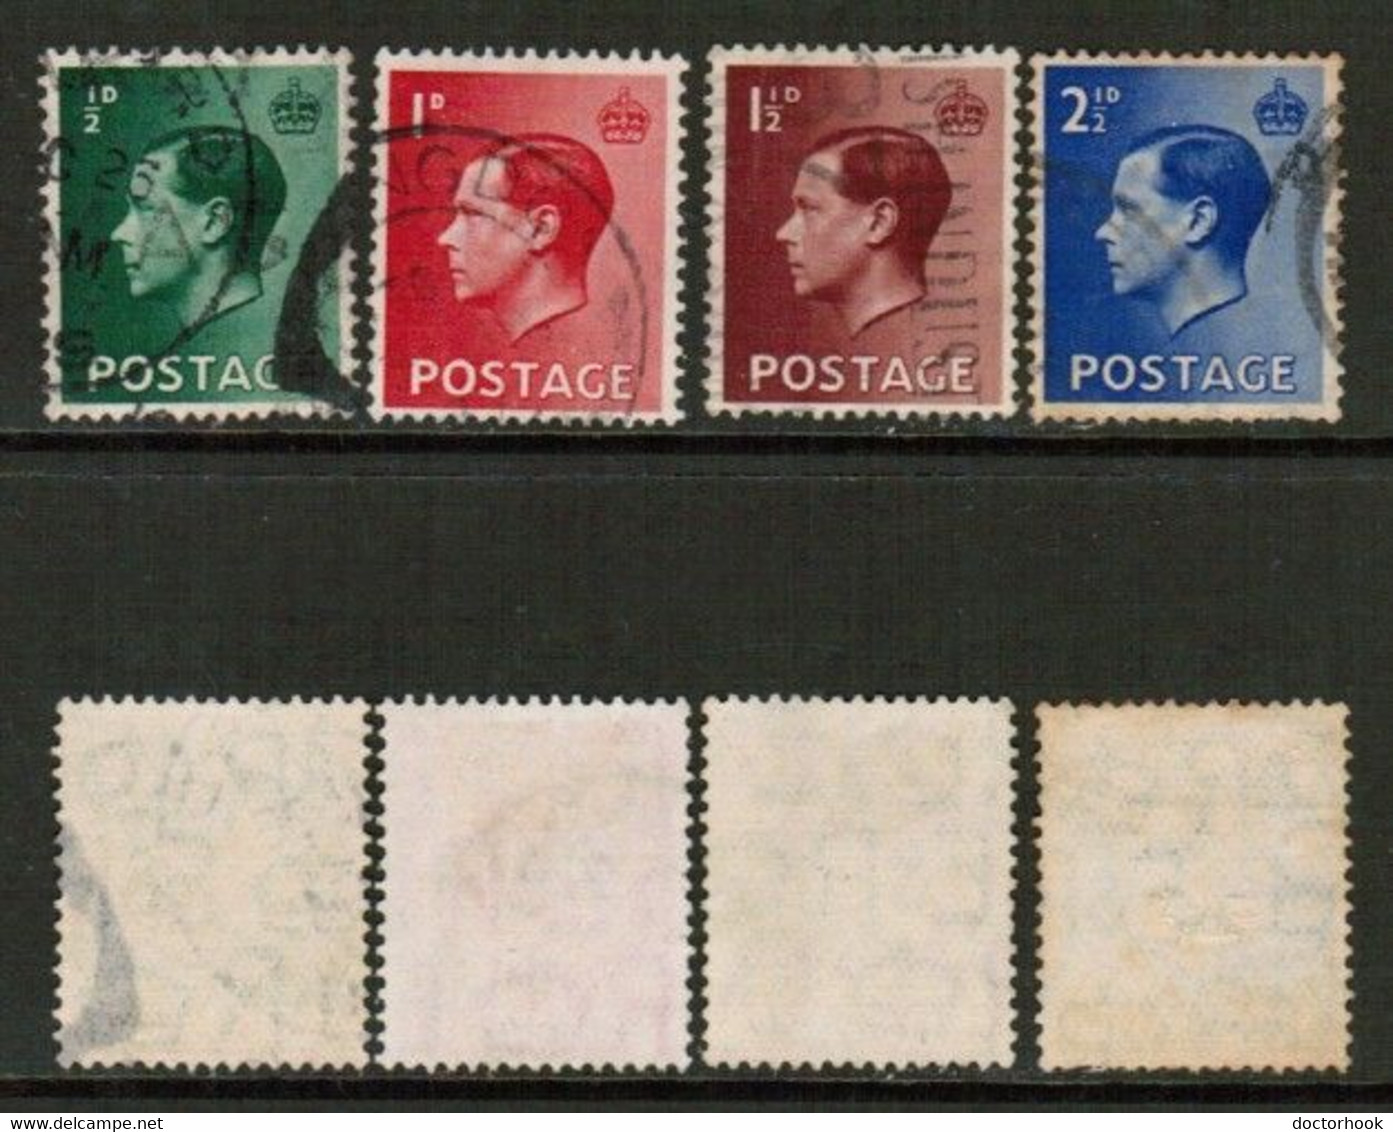 GREAT BRITAIN   Scott # 230-3 USED (CONDITION AS PER SCAN) (Stamp Scan # 832-8) - Oblitérés